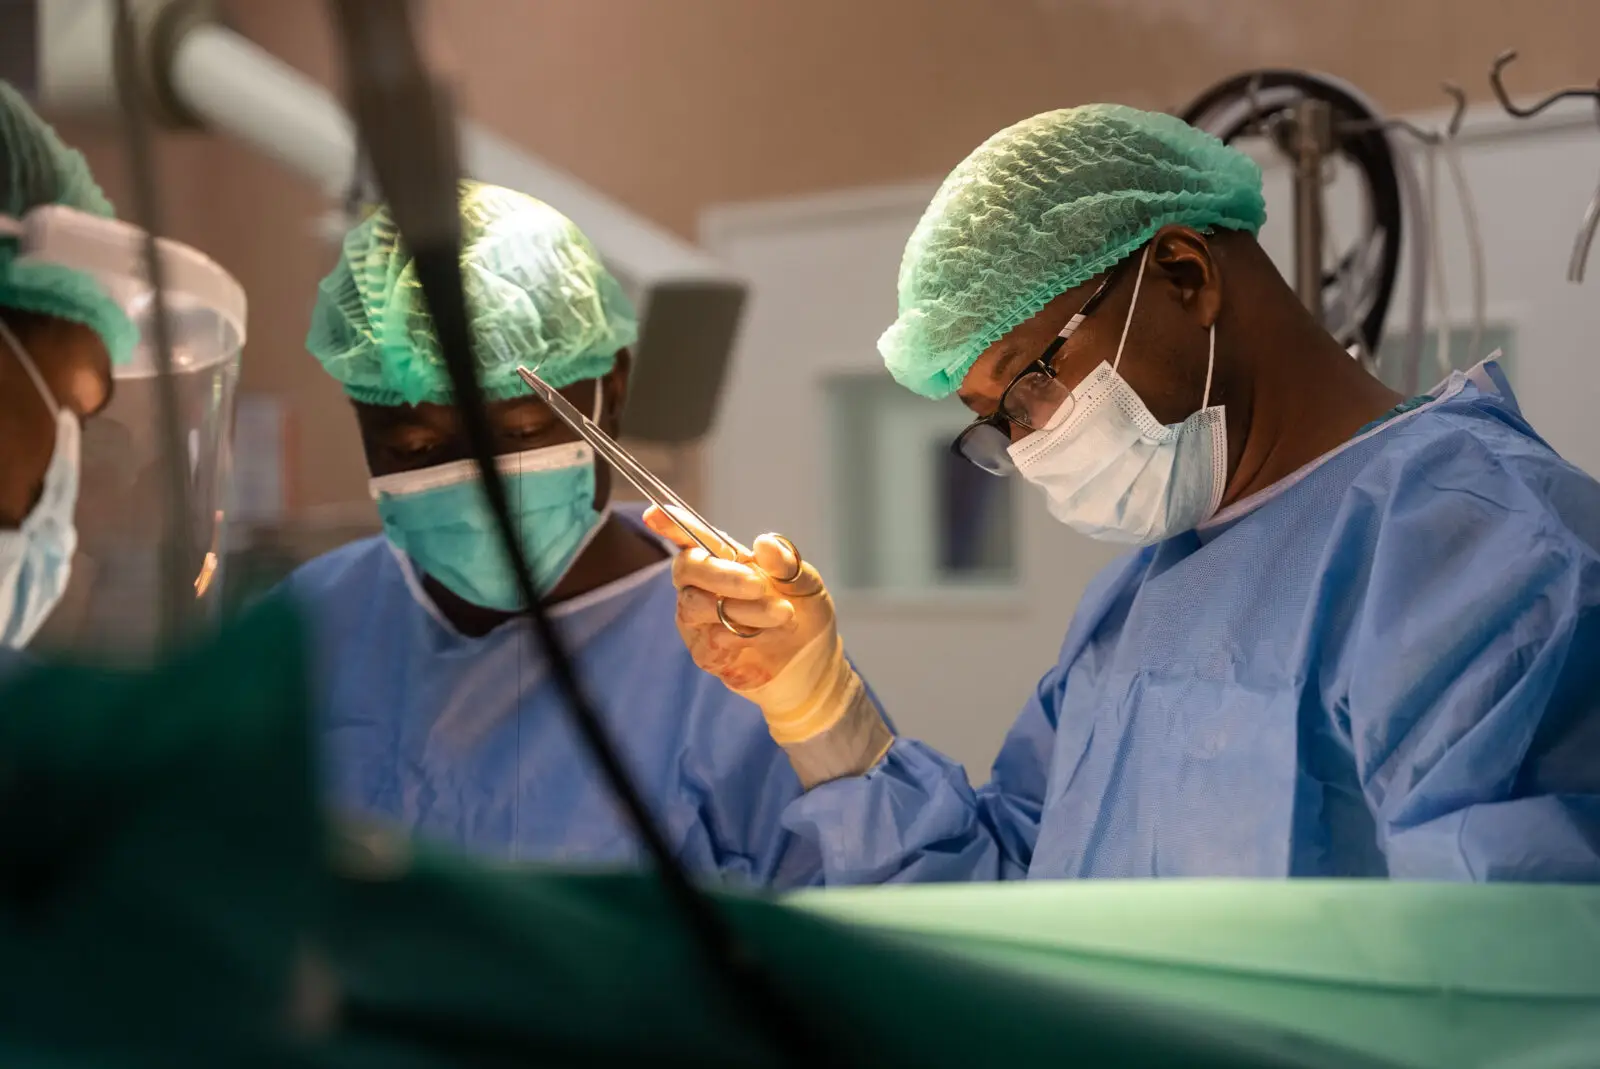 Surgeons operating on a patient for open heart surgery